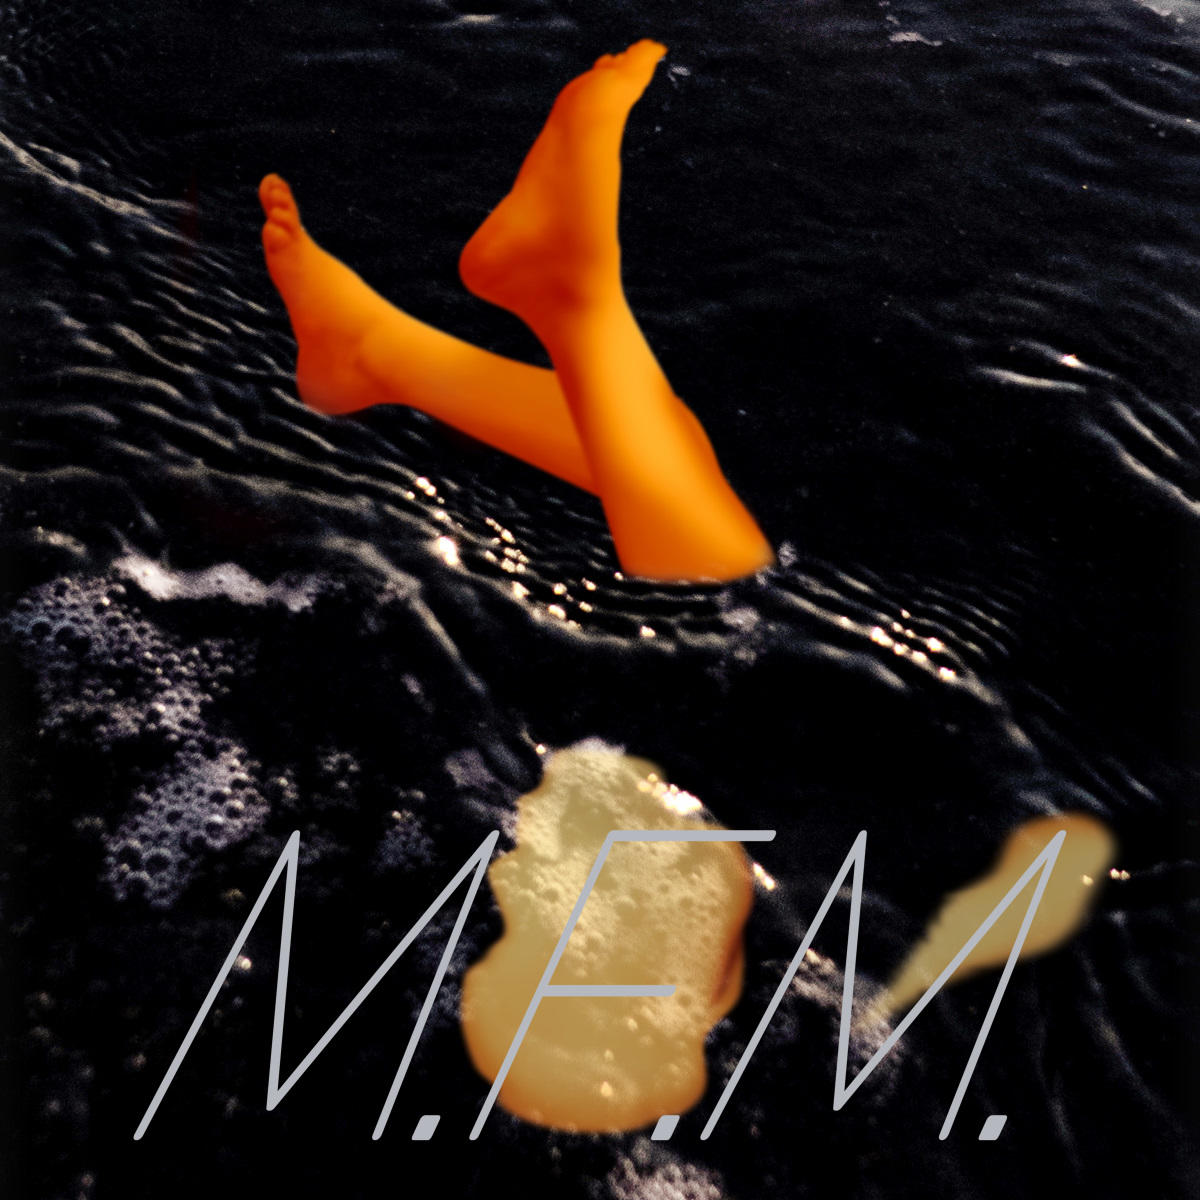 Made for Mermaid Single COVER_1200px.jpg